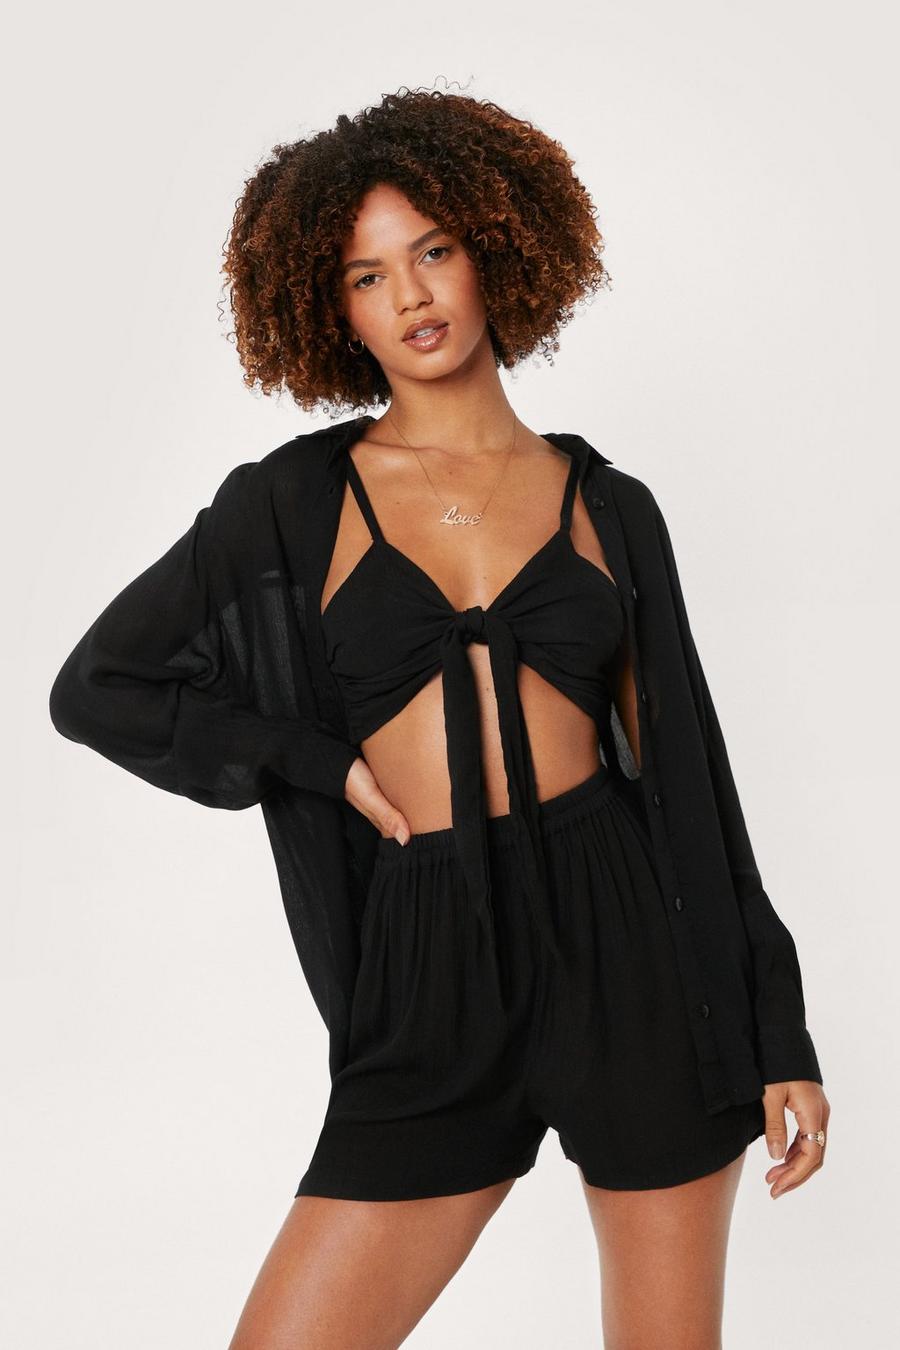 Black Bralette Shirt and Shorts 3pc Beach Cover Up Set